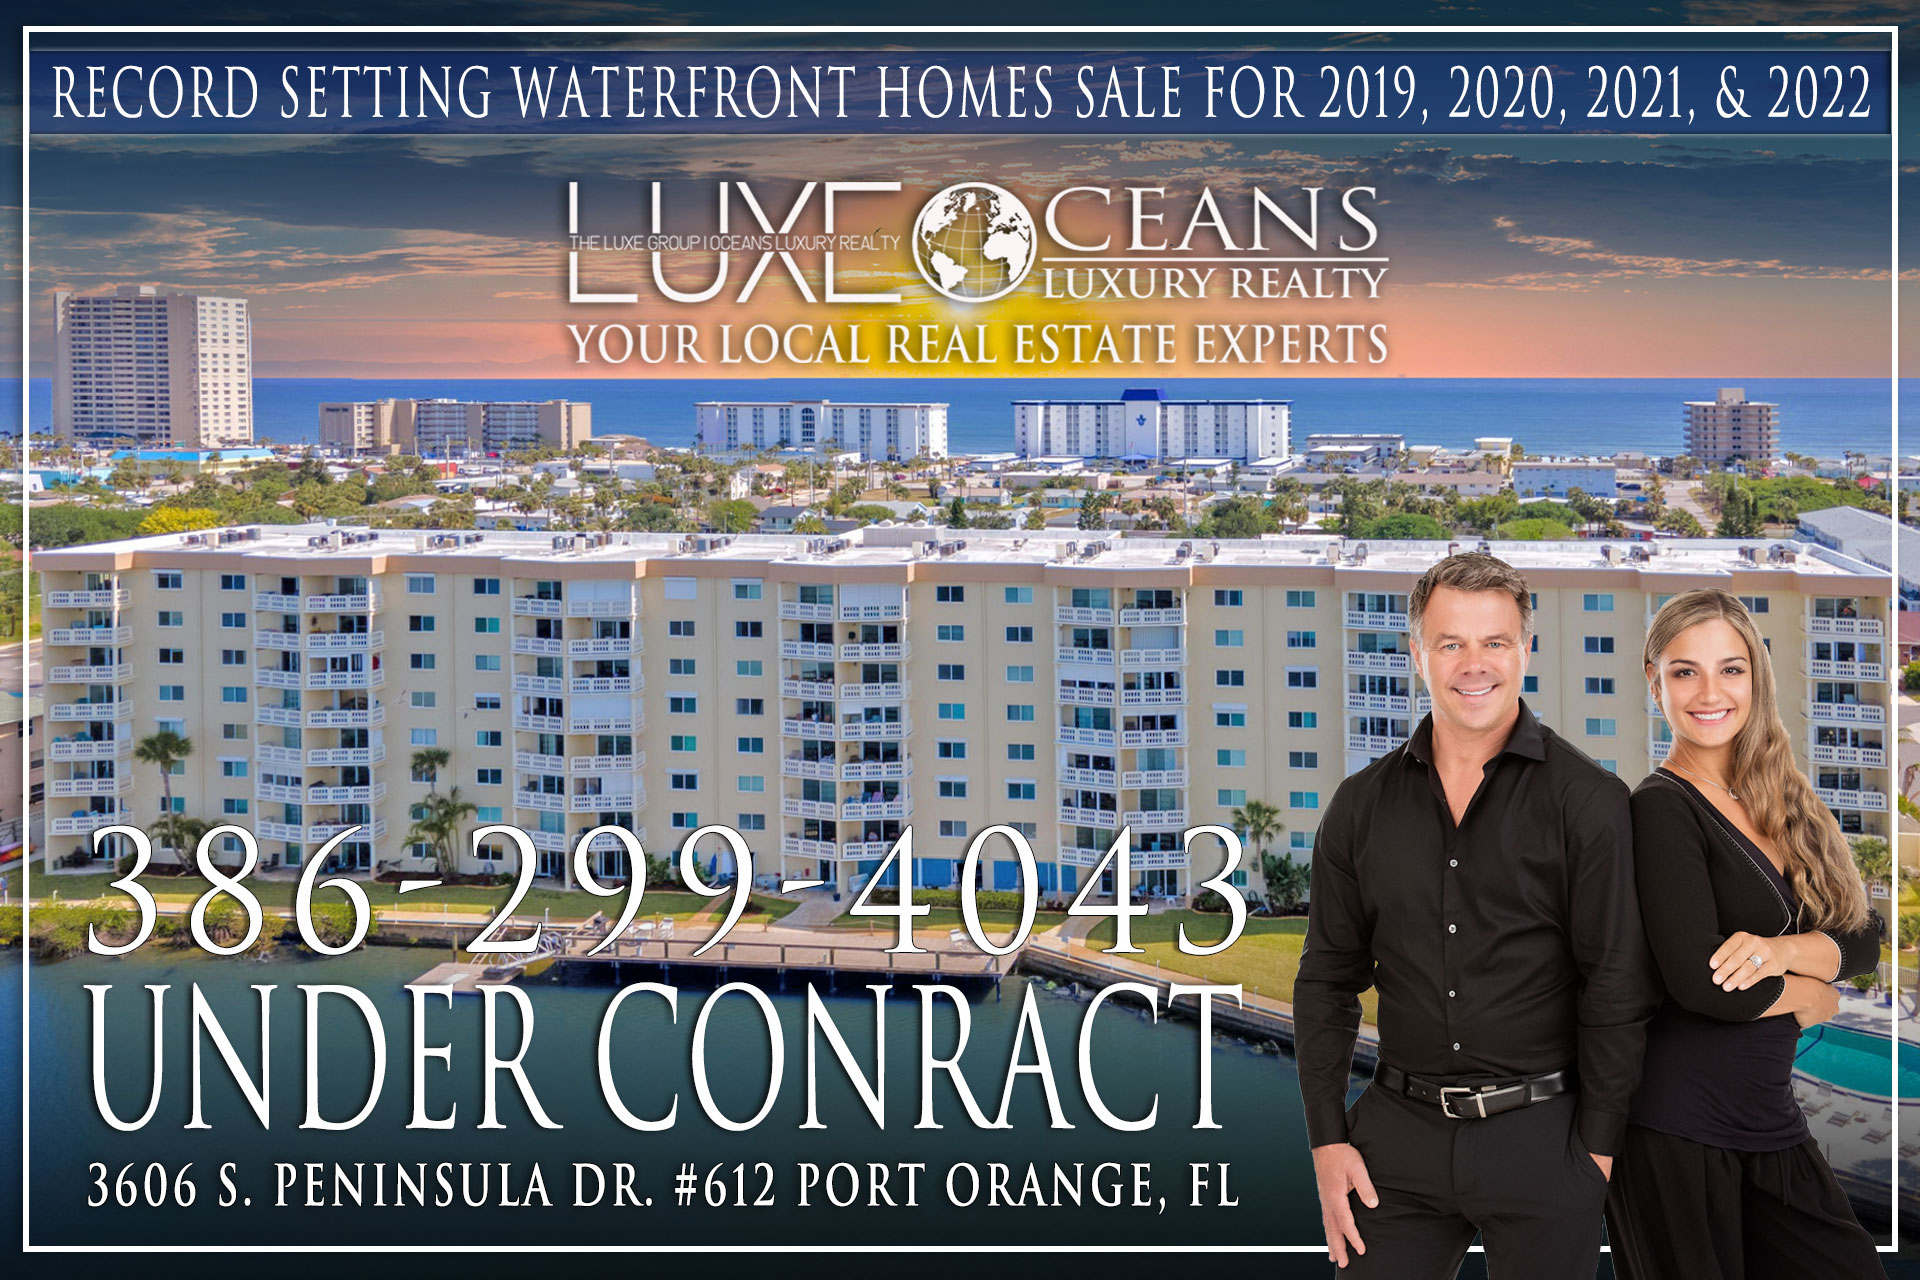 Admiralty Club Luxury Riverfront Condos For Sale. Under Contract Unit 612. 3606 S Peninsula Dr. Port Orange, FL | The LUXE Group at Oceans Luxury Realty 386-299-4043